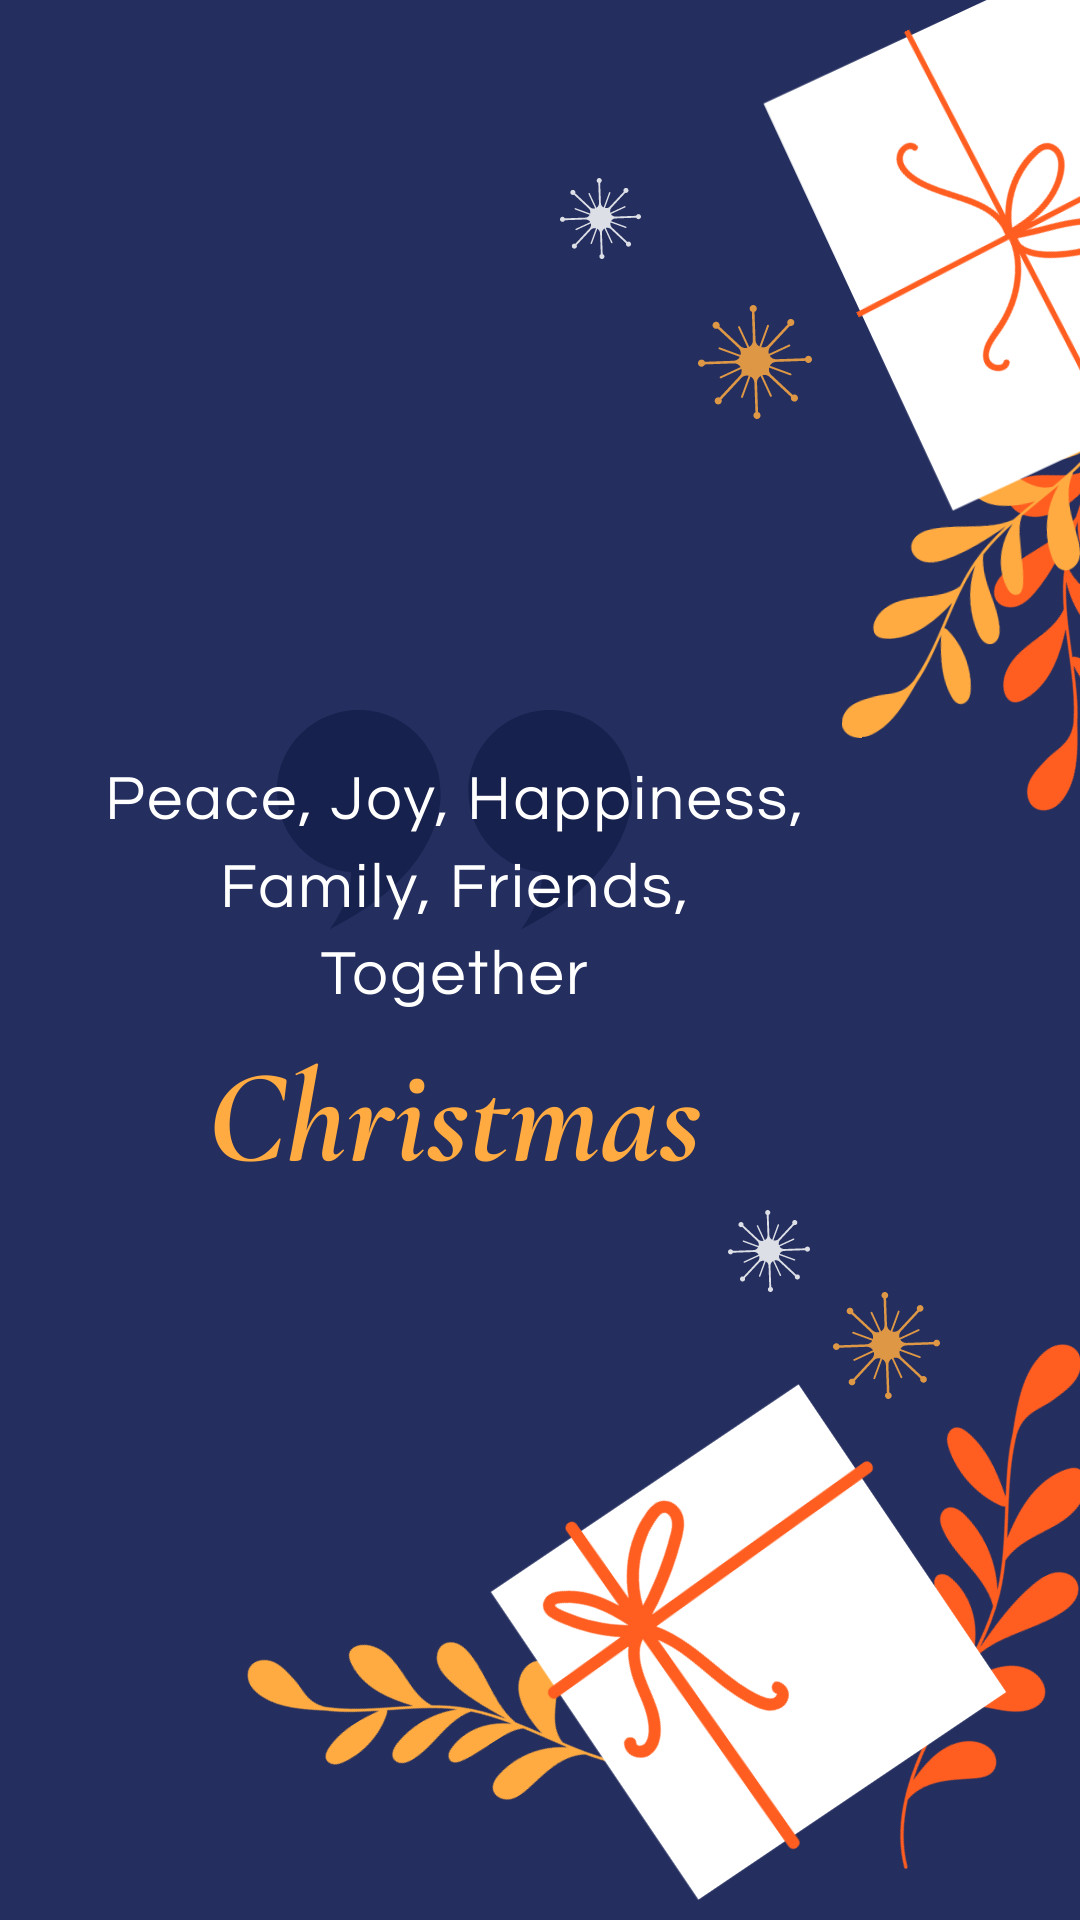 Christmas Together with Family and Friends Facebook Cover 820x360